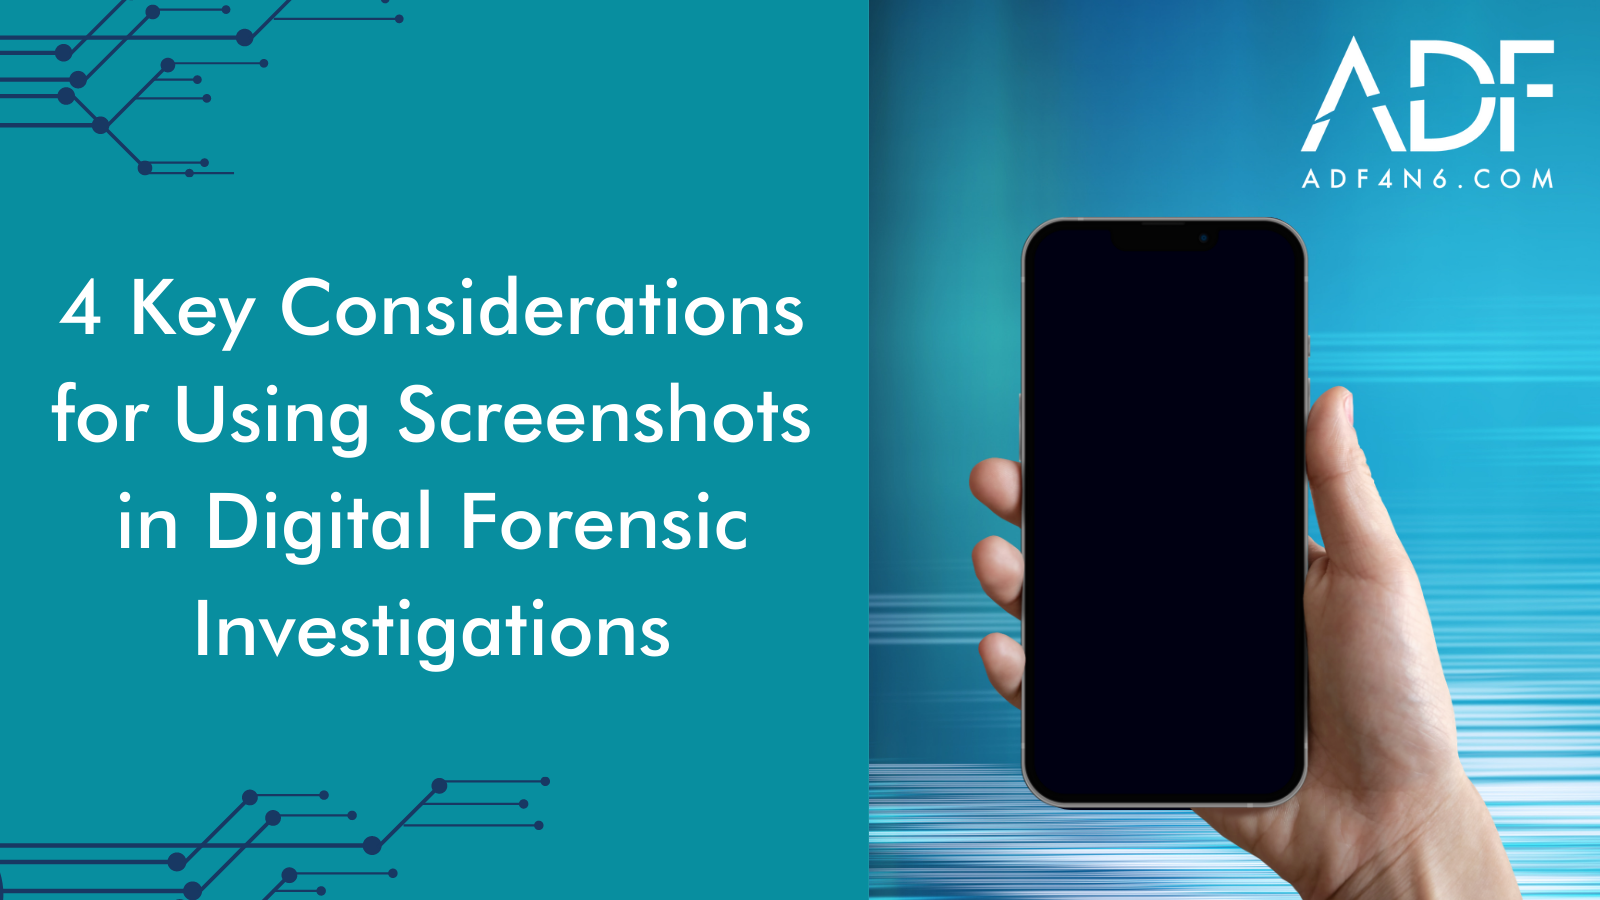 4 Key Considerations for Using Screenshots in Digital Forensic Investigations